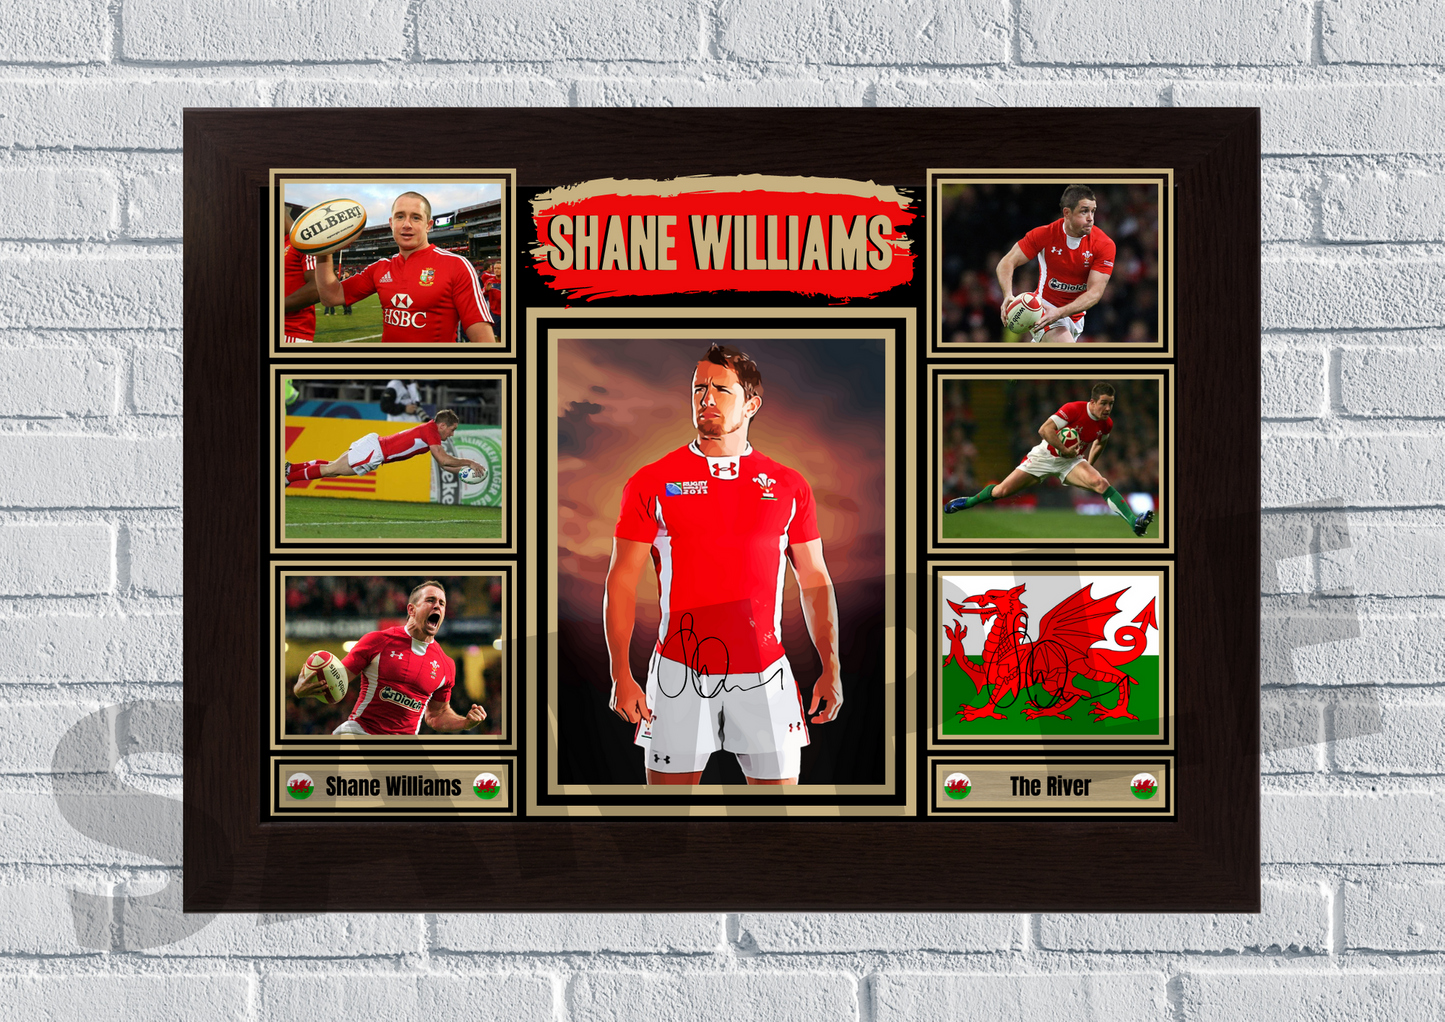 Shane Williams (Rugby) #89 - Collectible/Memorabilia/Print signed